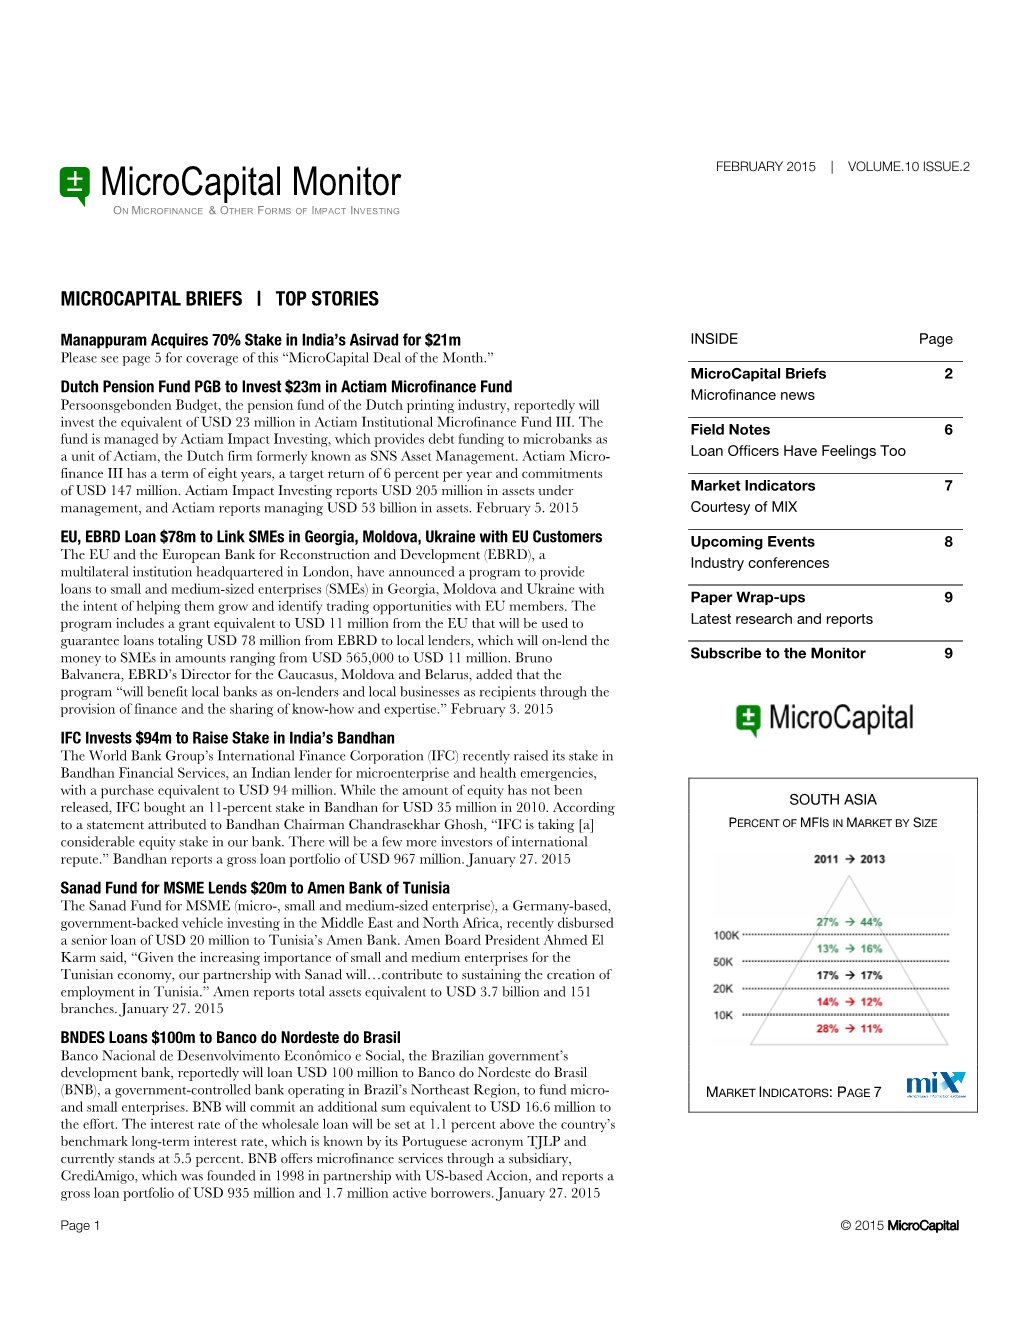 Microcapital Monitor FEBRUARY 2015 | VOLUME.10 ISSUE.2 on MICROFINANCE & OTHER FORMS of IMPACT INVESTING